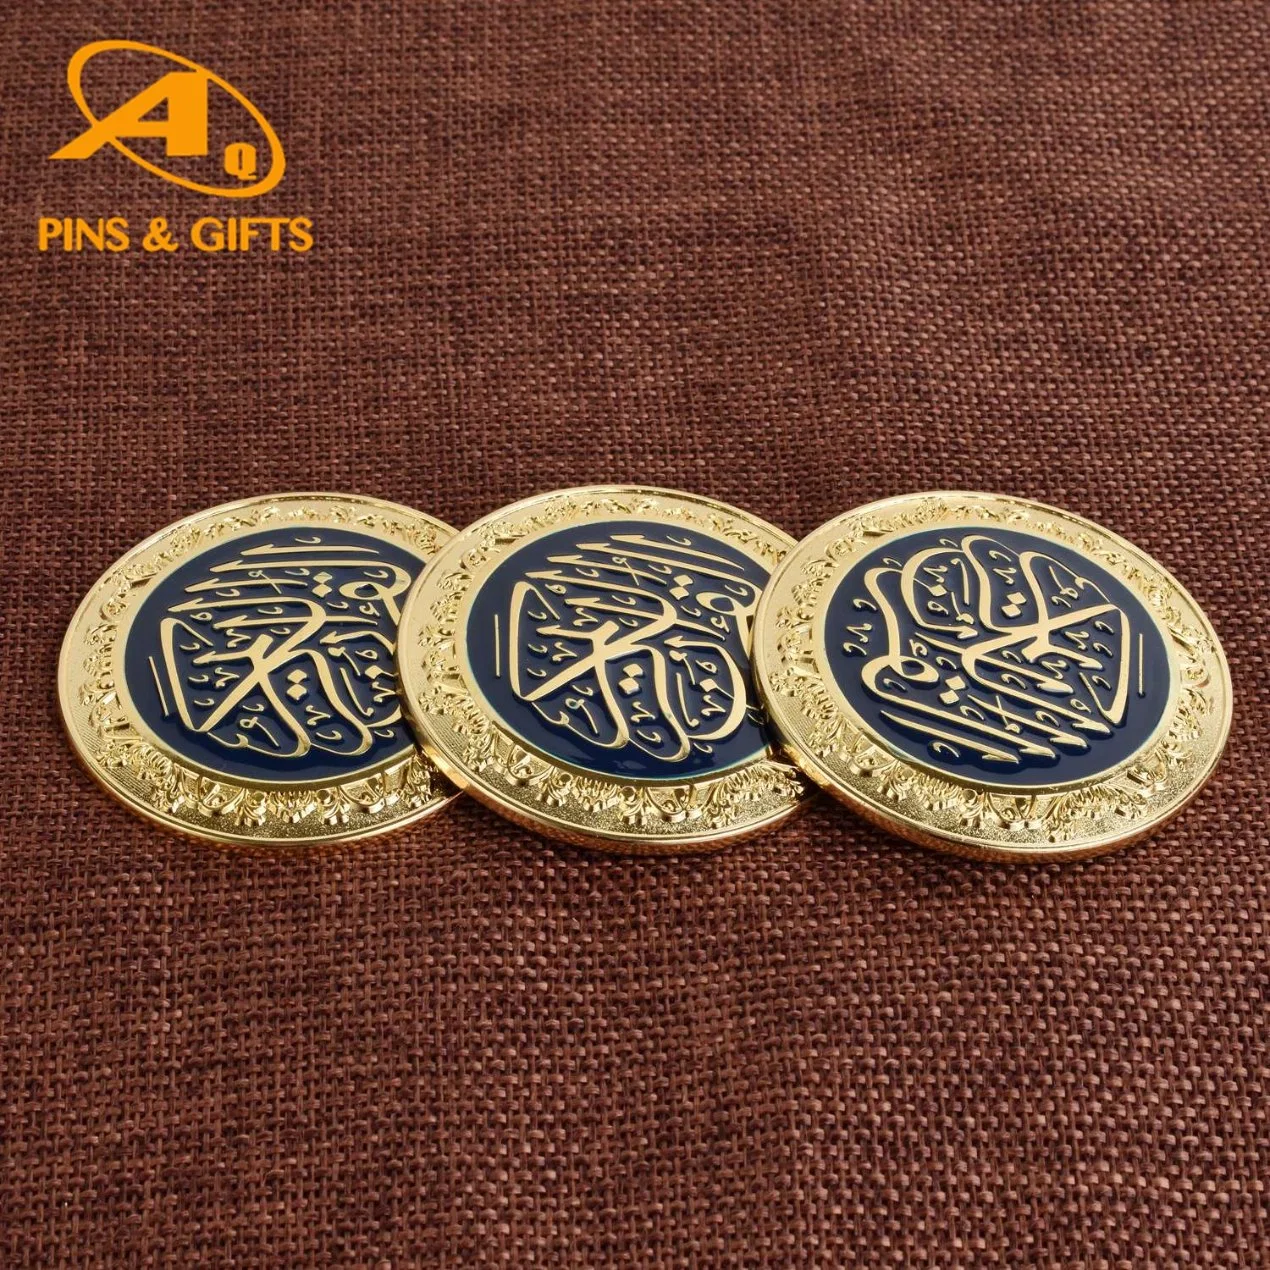 Promotion Gift NFA Golf 3D Enamel Air Force Police Coin Gold Membership Card Souvenir Beautiful Crafts (COIN-069)